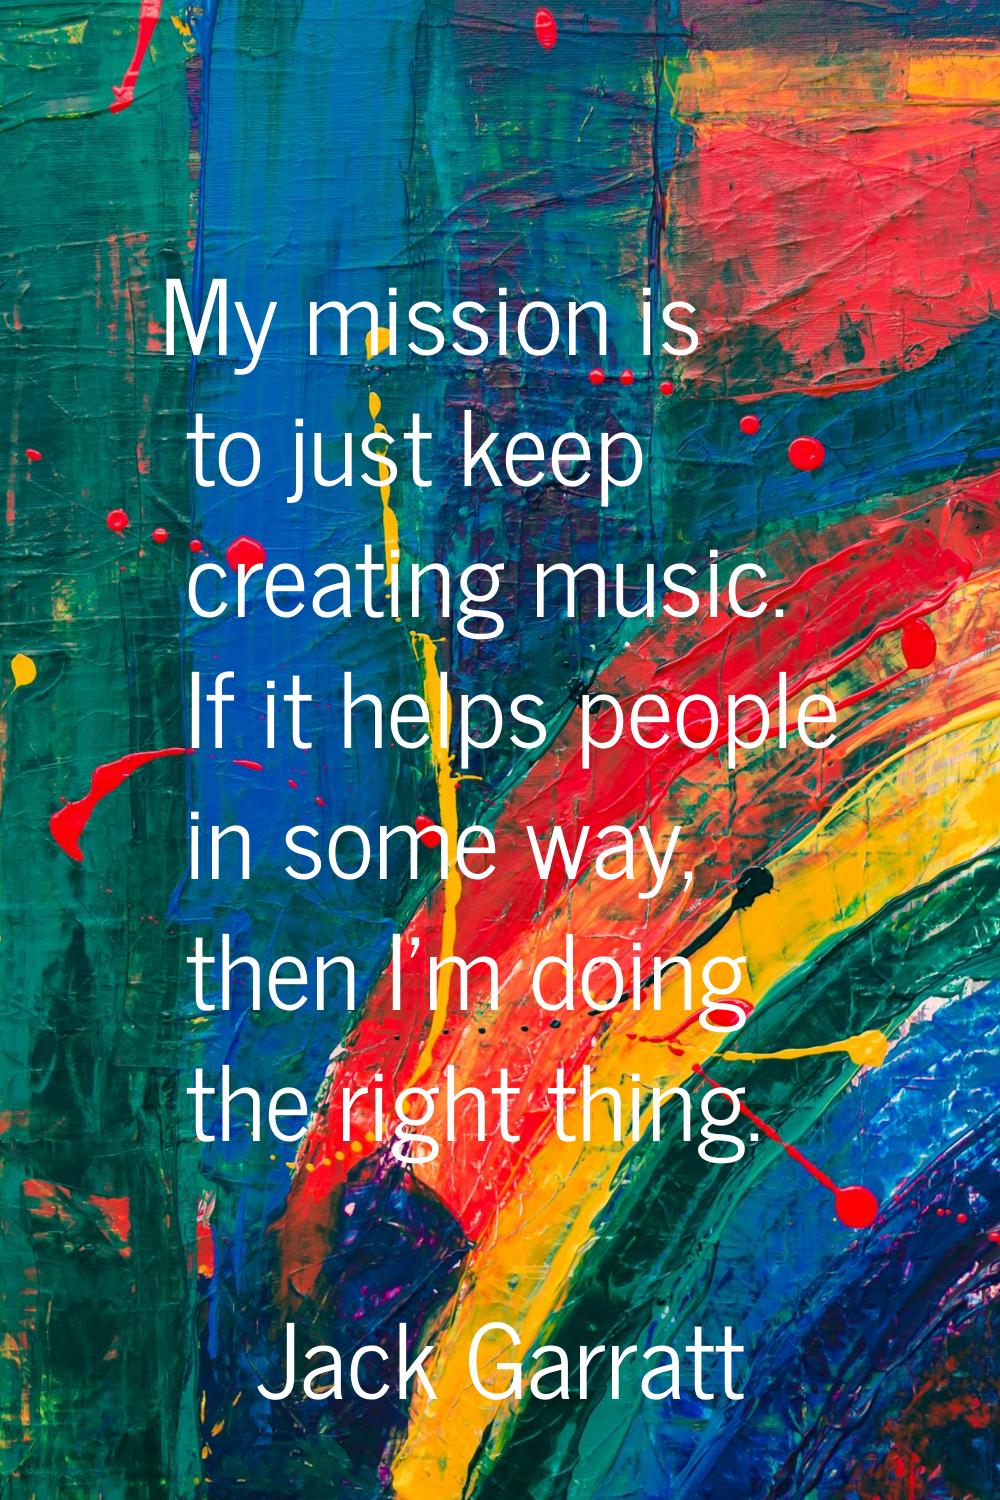 My mission is to just keep creating music. If it helps people in some way, then I'm doing the right